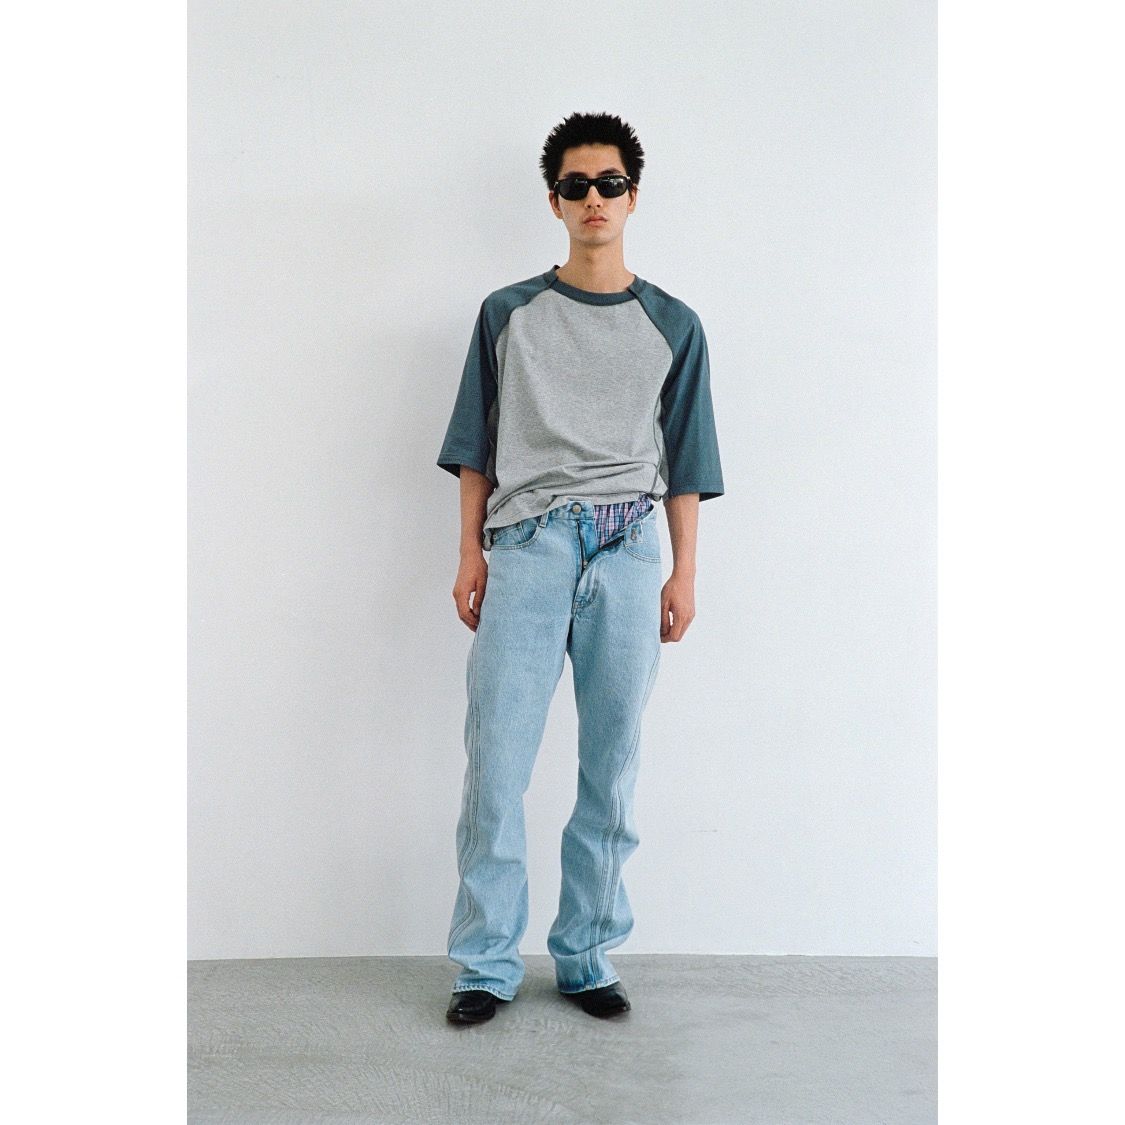 NVRFRGT - 【残りわずか】3D Twisted Jeans | ACRMTSM ONLINE STORE